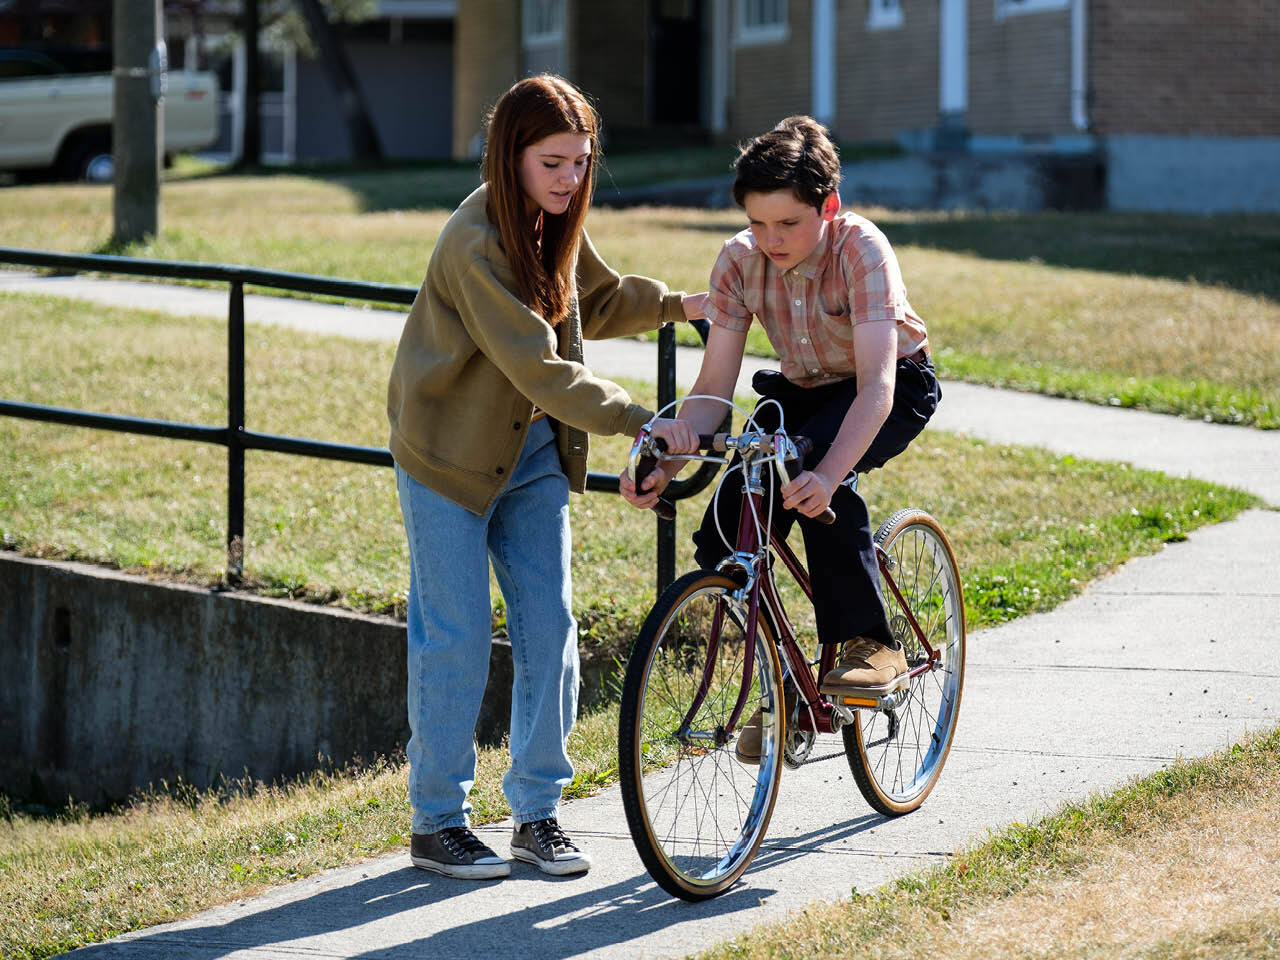 A tweenage girl helps a younger looking boy learn to ride a bike.